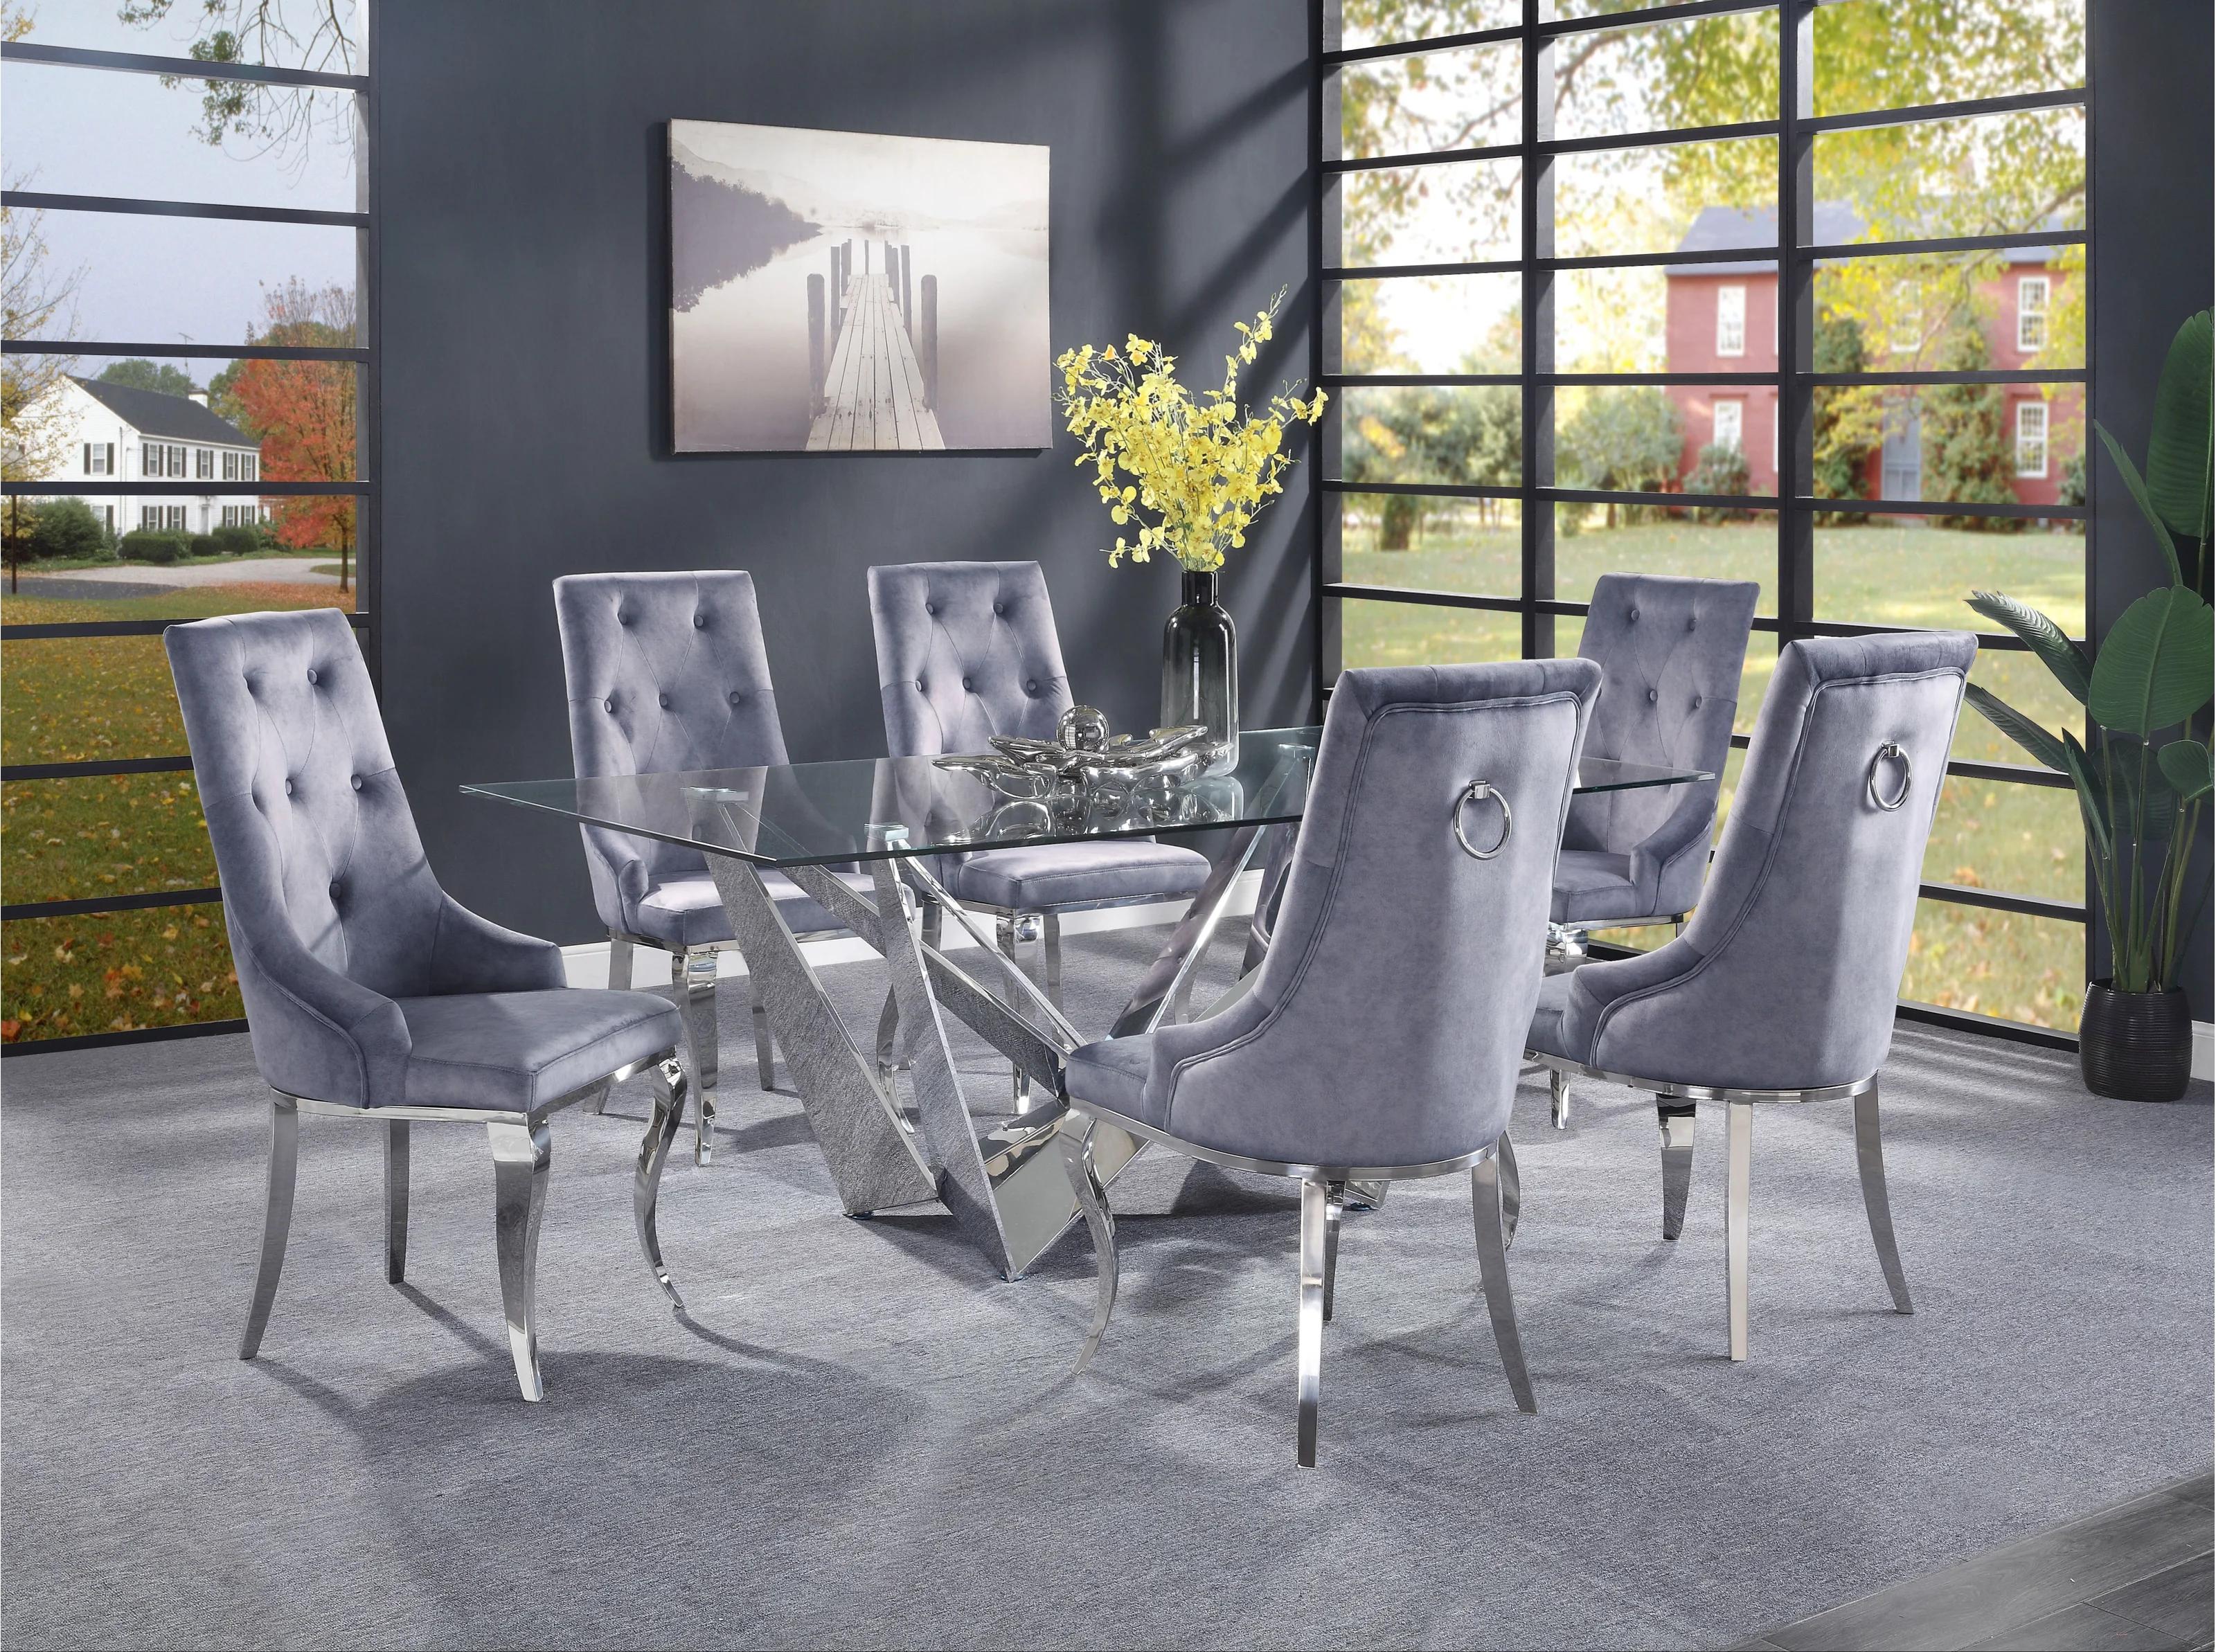 

    
Modern Clear Glass & Stainless Steel 7pcs Dining Set w/ Gray Chairs by Acme Dekel 70140-7pcs
